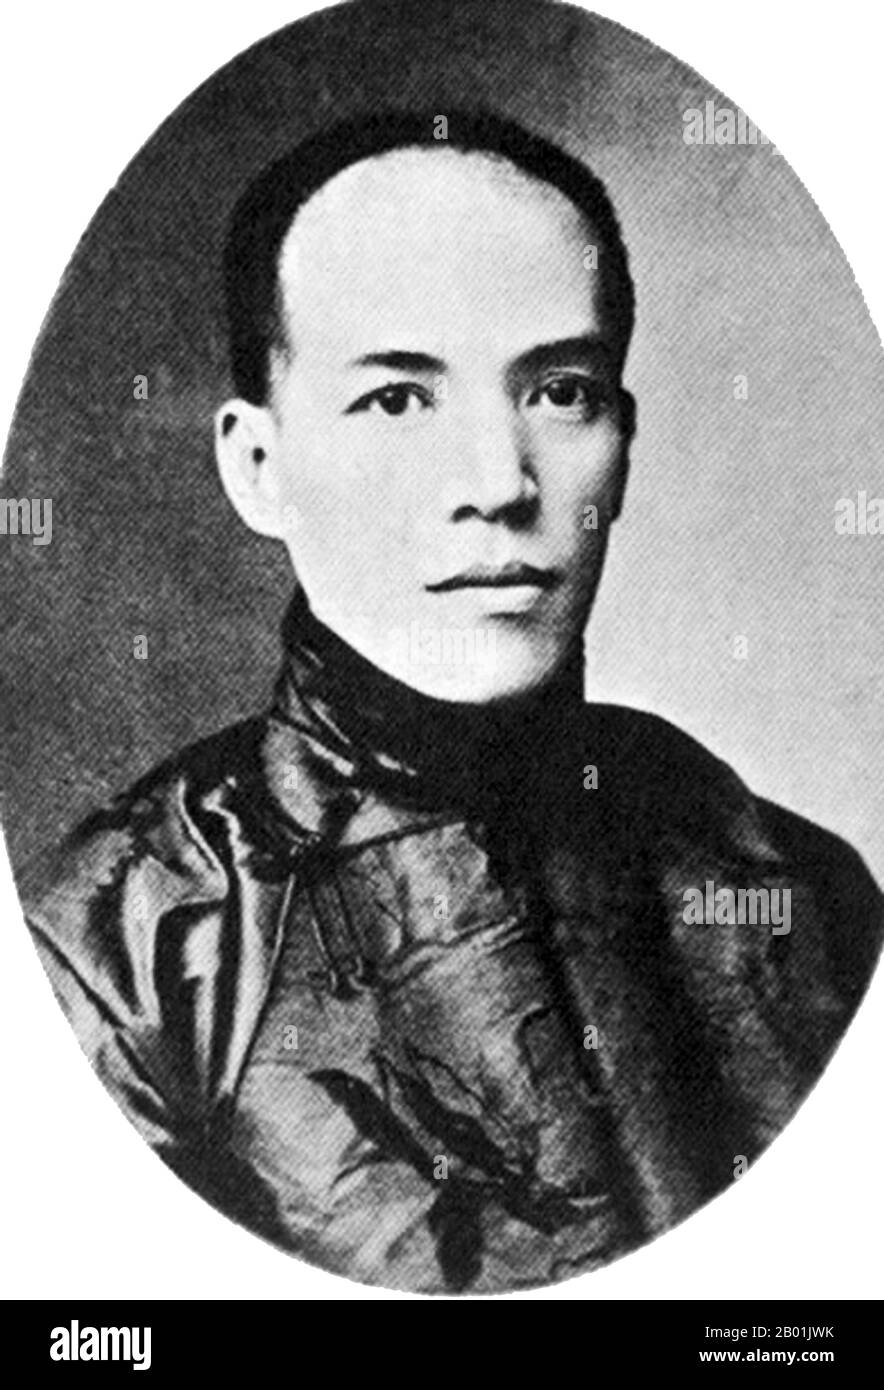 Liang Qichao (Wade-Giles: Liang Ch'i-ch'ao; Styled Zhuoru, Pseudonym: Rengong, February 23, 1873–January 19, 1929) was a Chinese scholar, journalist, philosopher and reformist during the Qing Dynasty (1644–1911), who inspired Chinese scholars with his writings and reform movements. He died of illness in Beijing at the age of 55.  As an advocate of constitutional monarchy, Liang was unhappy with the governance of the Qing Government and wanted to change the status quo in China. He organized reforms with Kang Youwei by putting their ideas on paper and sending them to Emperor Guangxu (光緒帝, 1871–1 Stock Photo